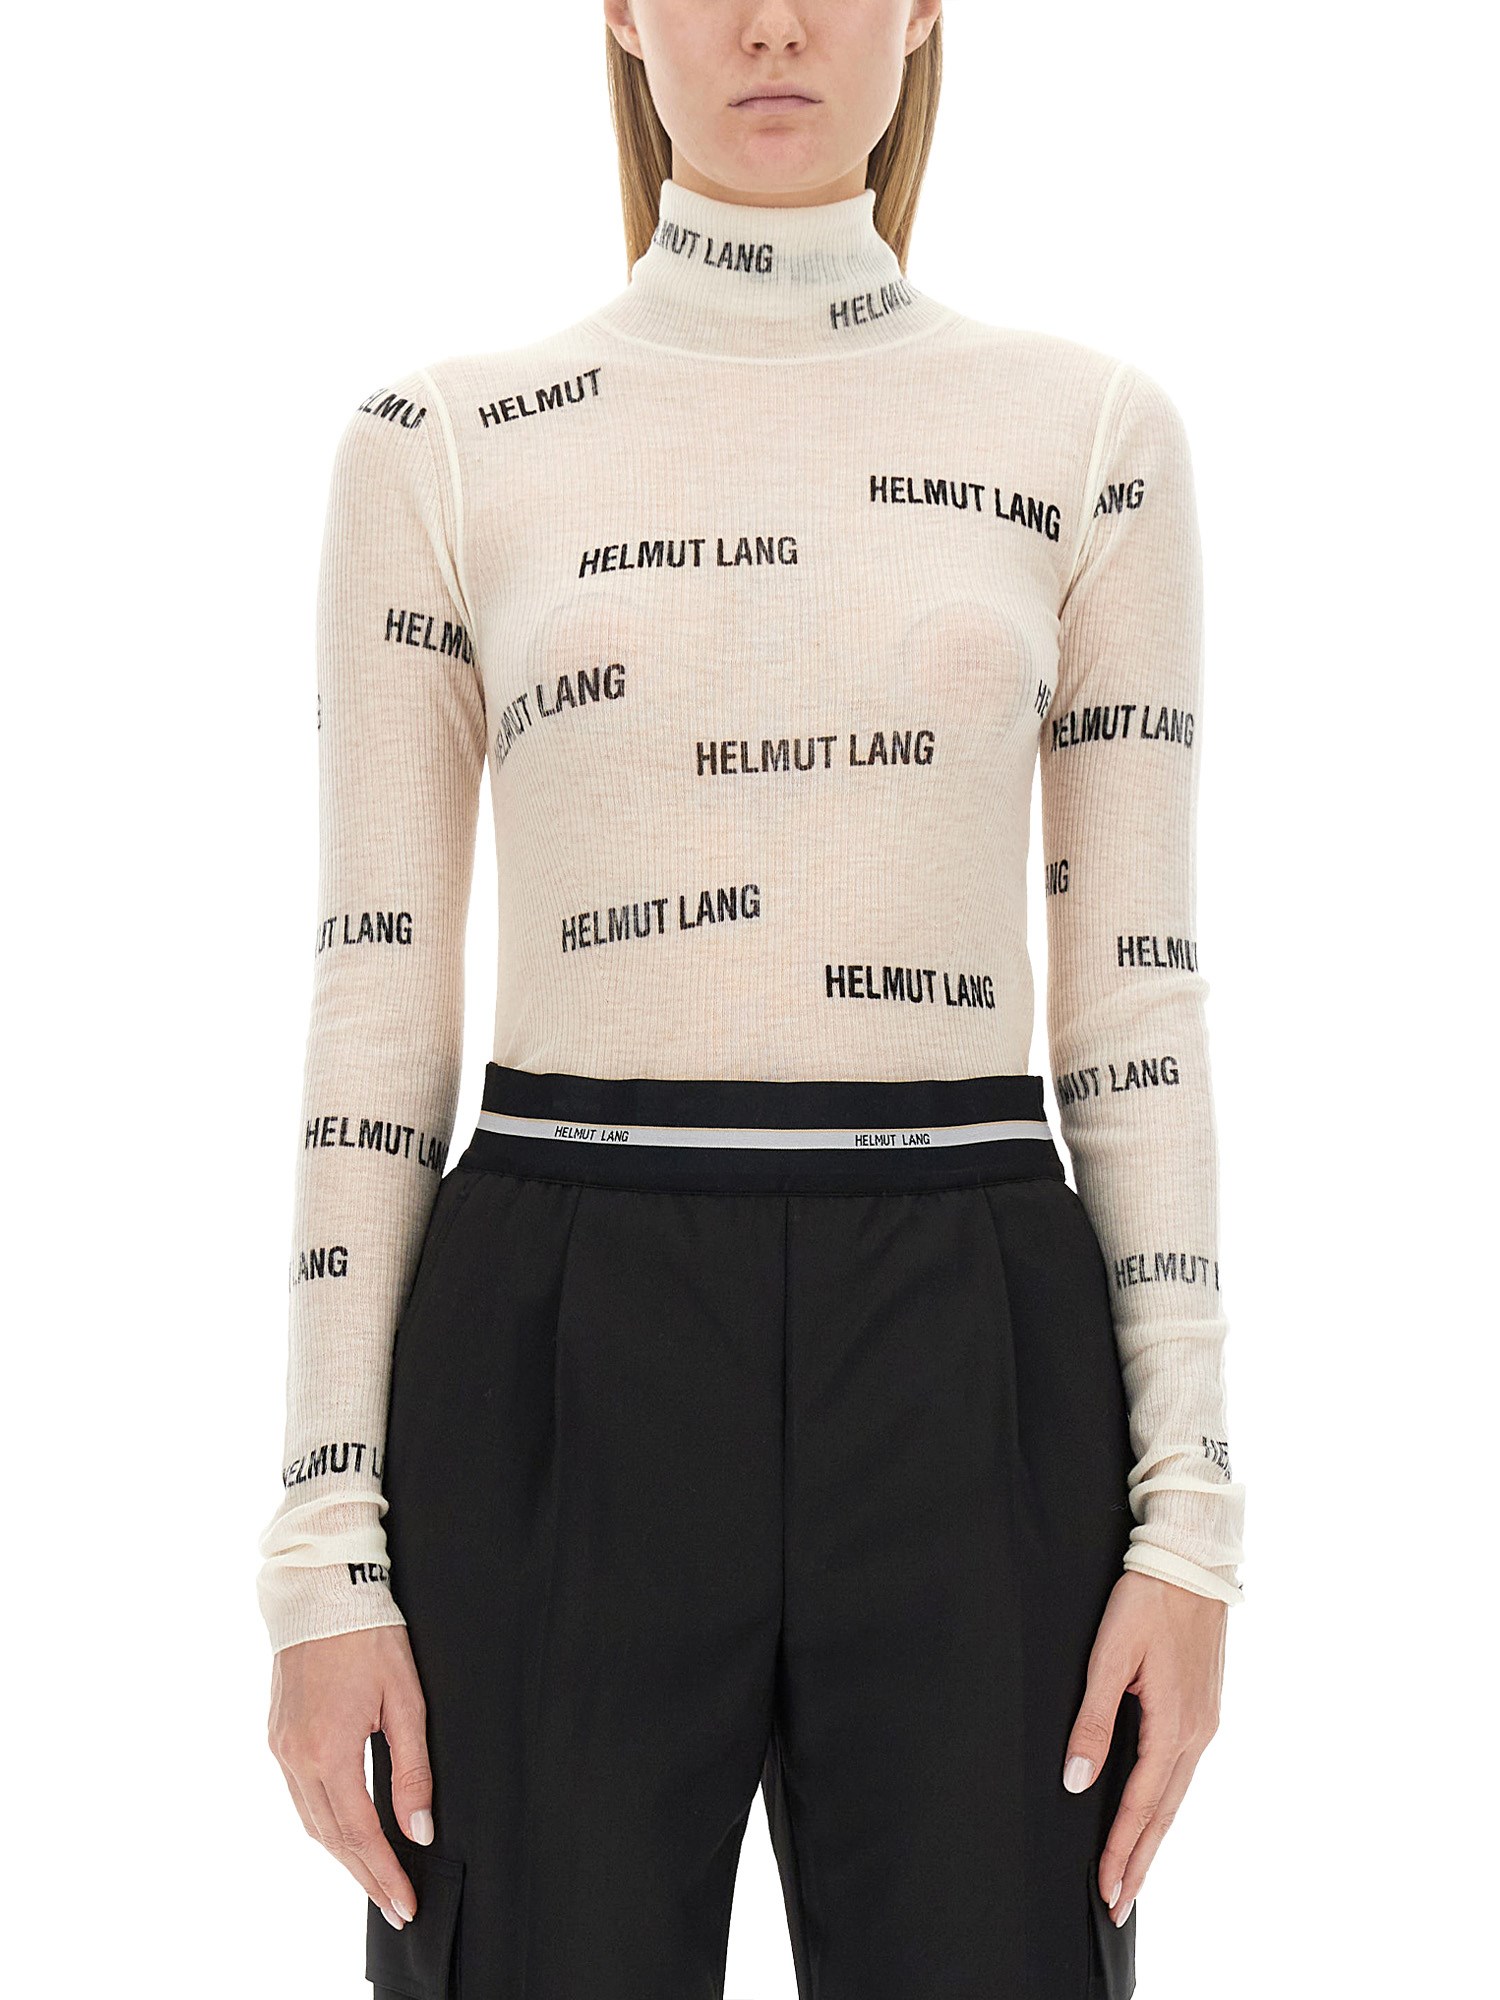 helmut lang tops with logo